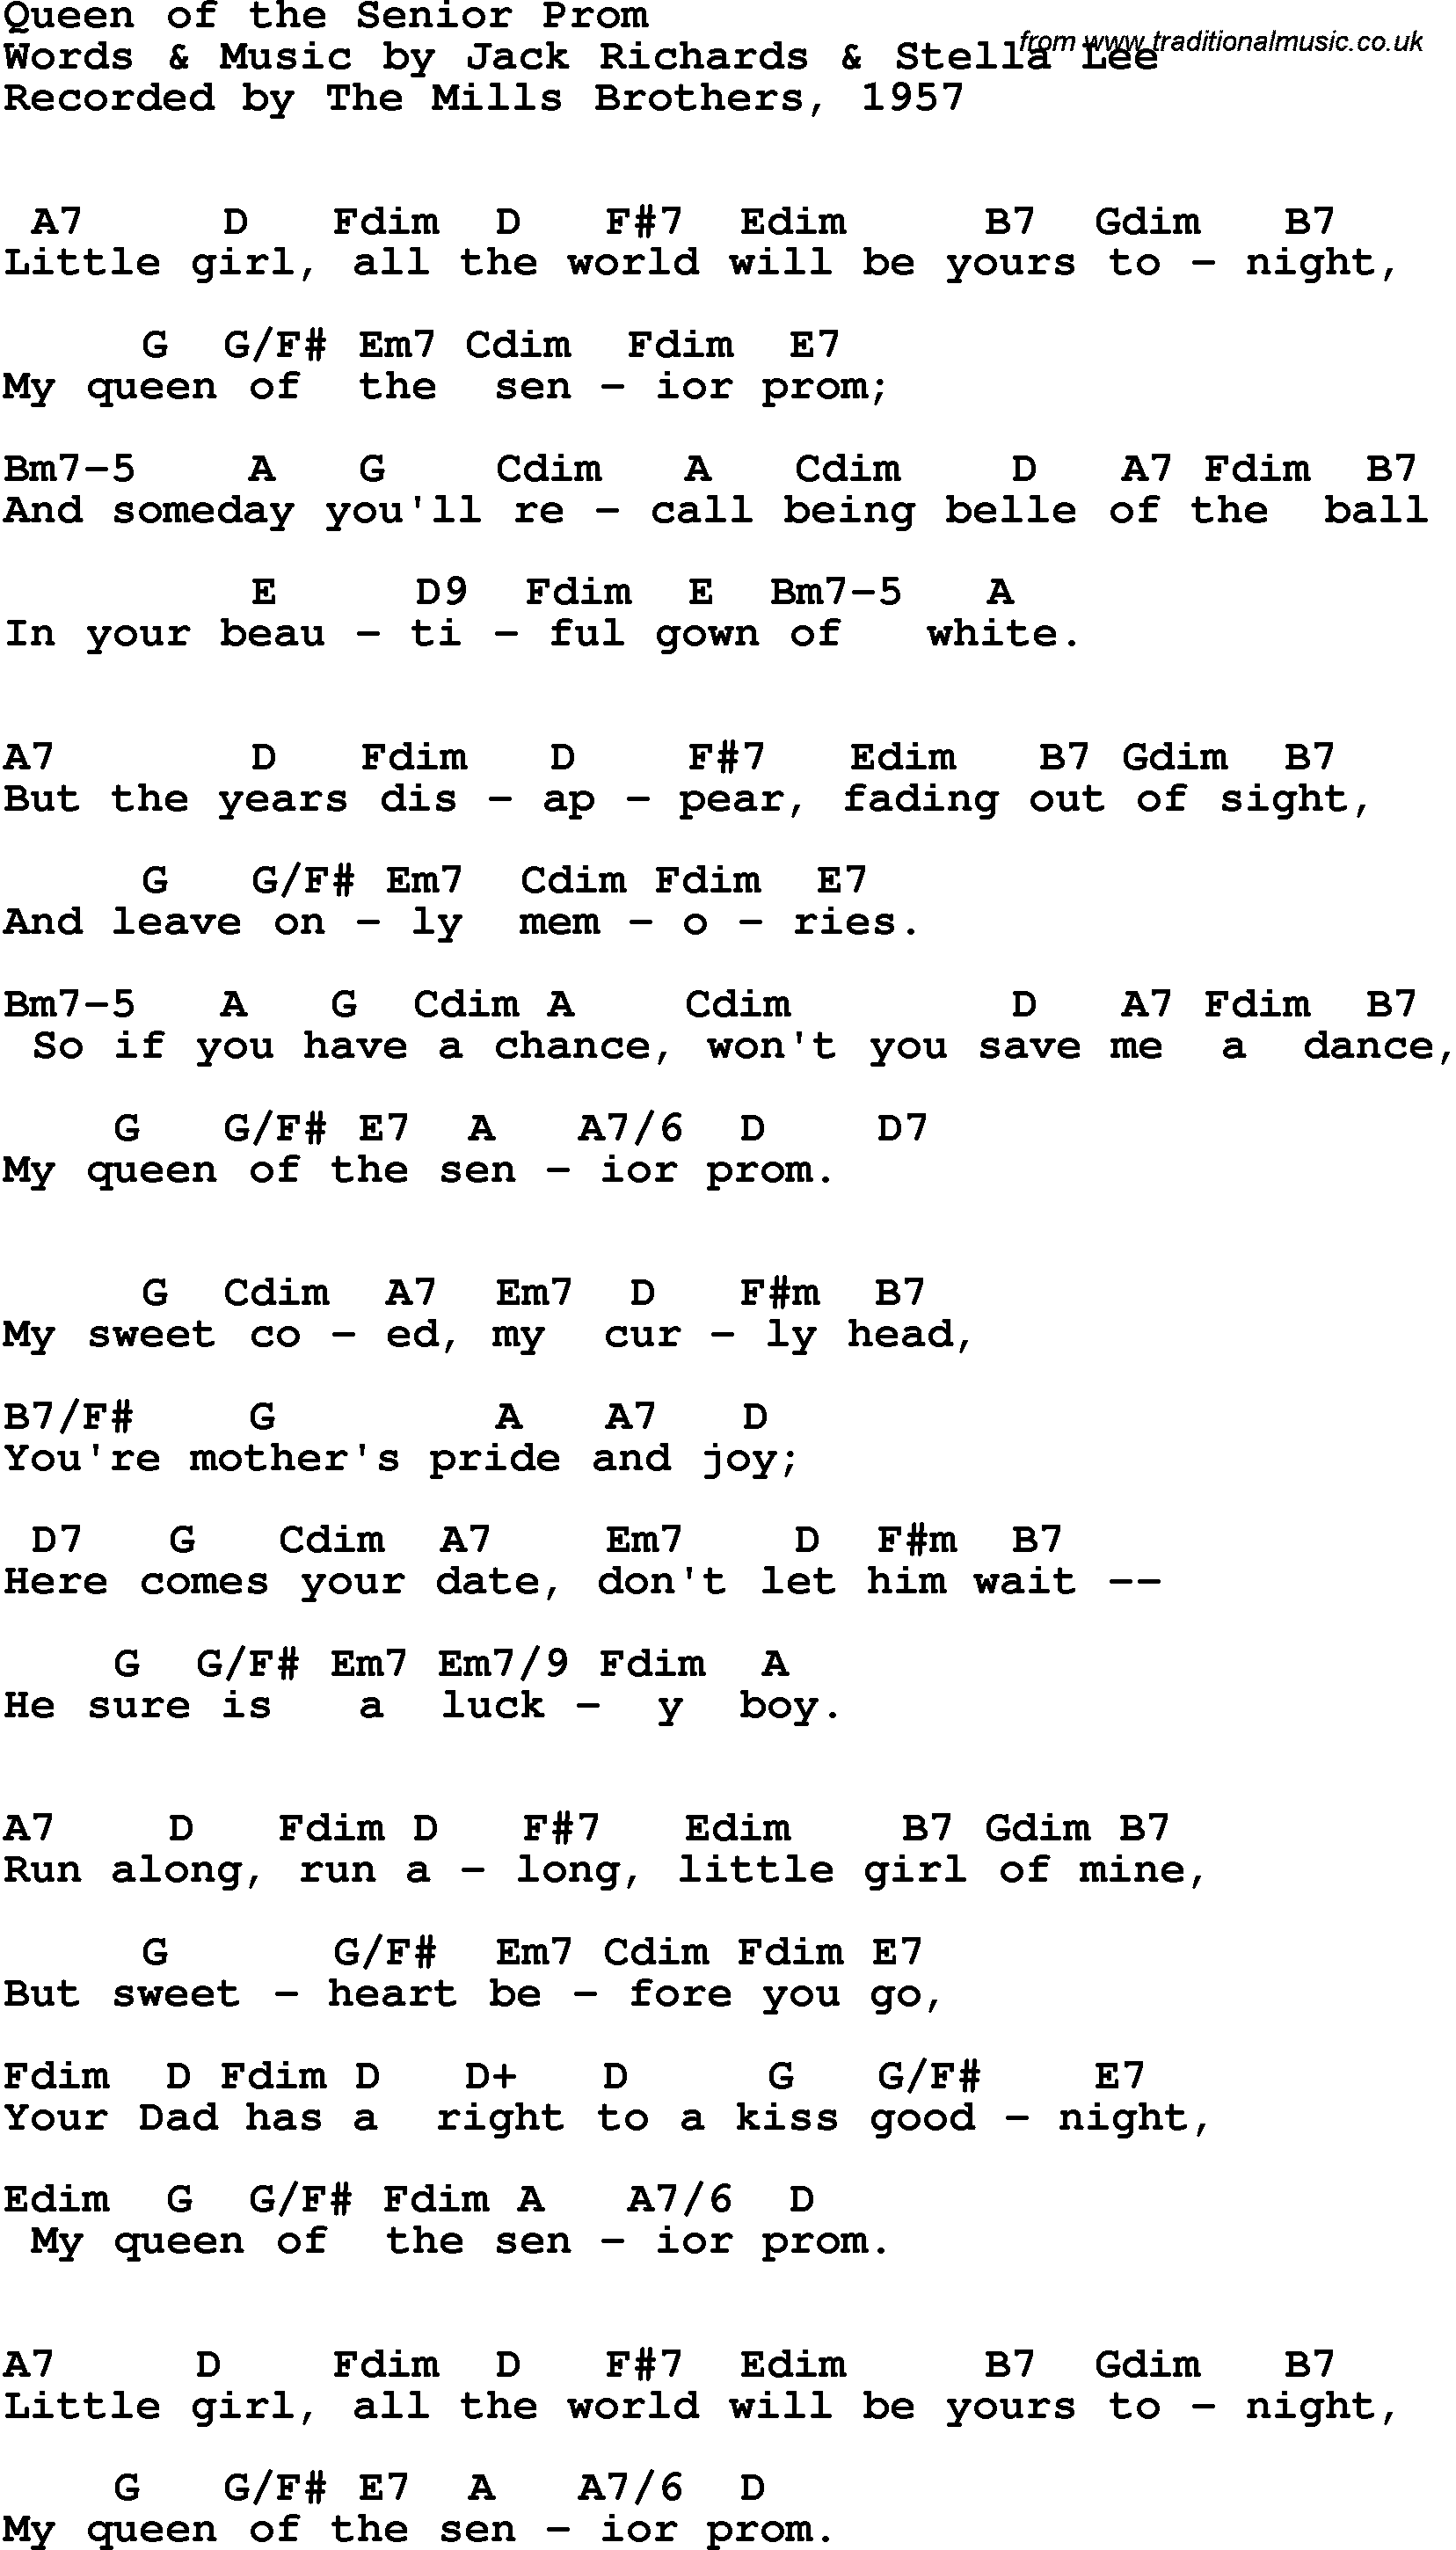 Song Lyrics with guitar chords for Queen Of The Senior Prom - Mills Brothers, 1957